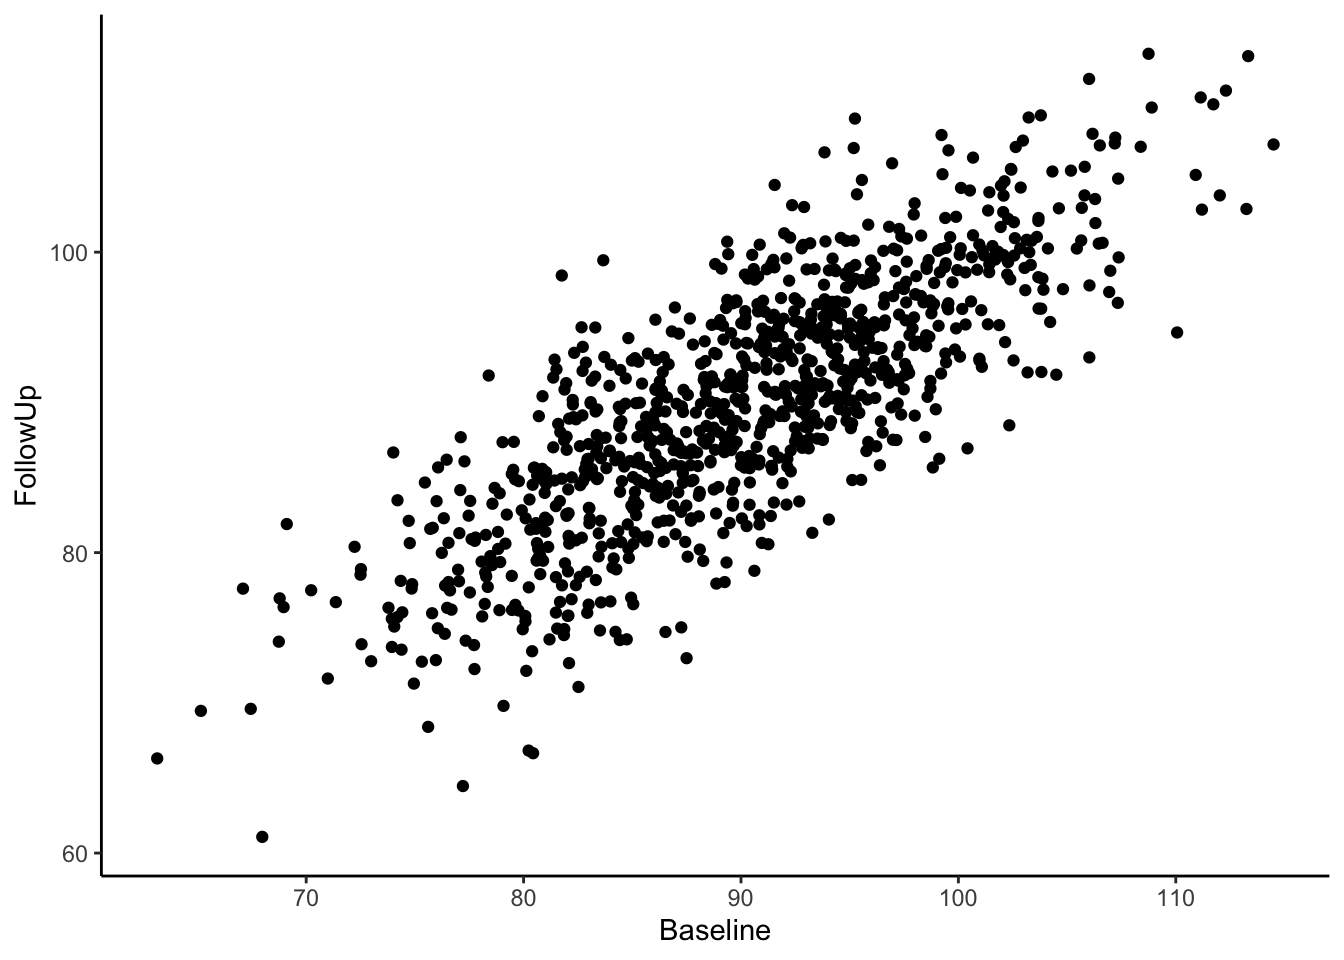 Scatterplot between Baseline and Follow Up showing a strong linear relationship between the two variables.